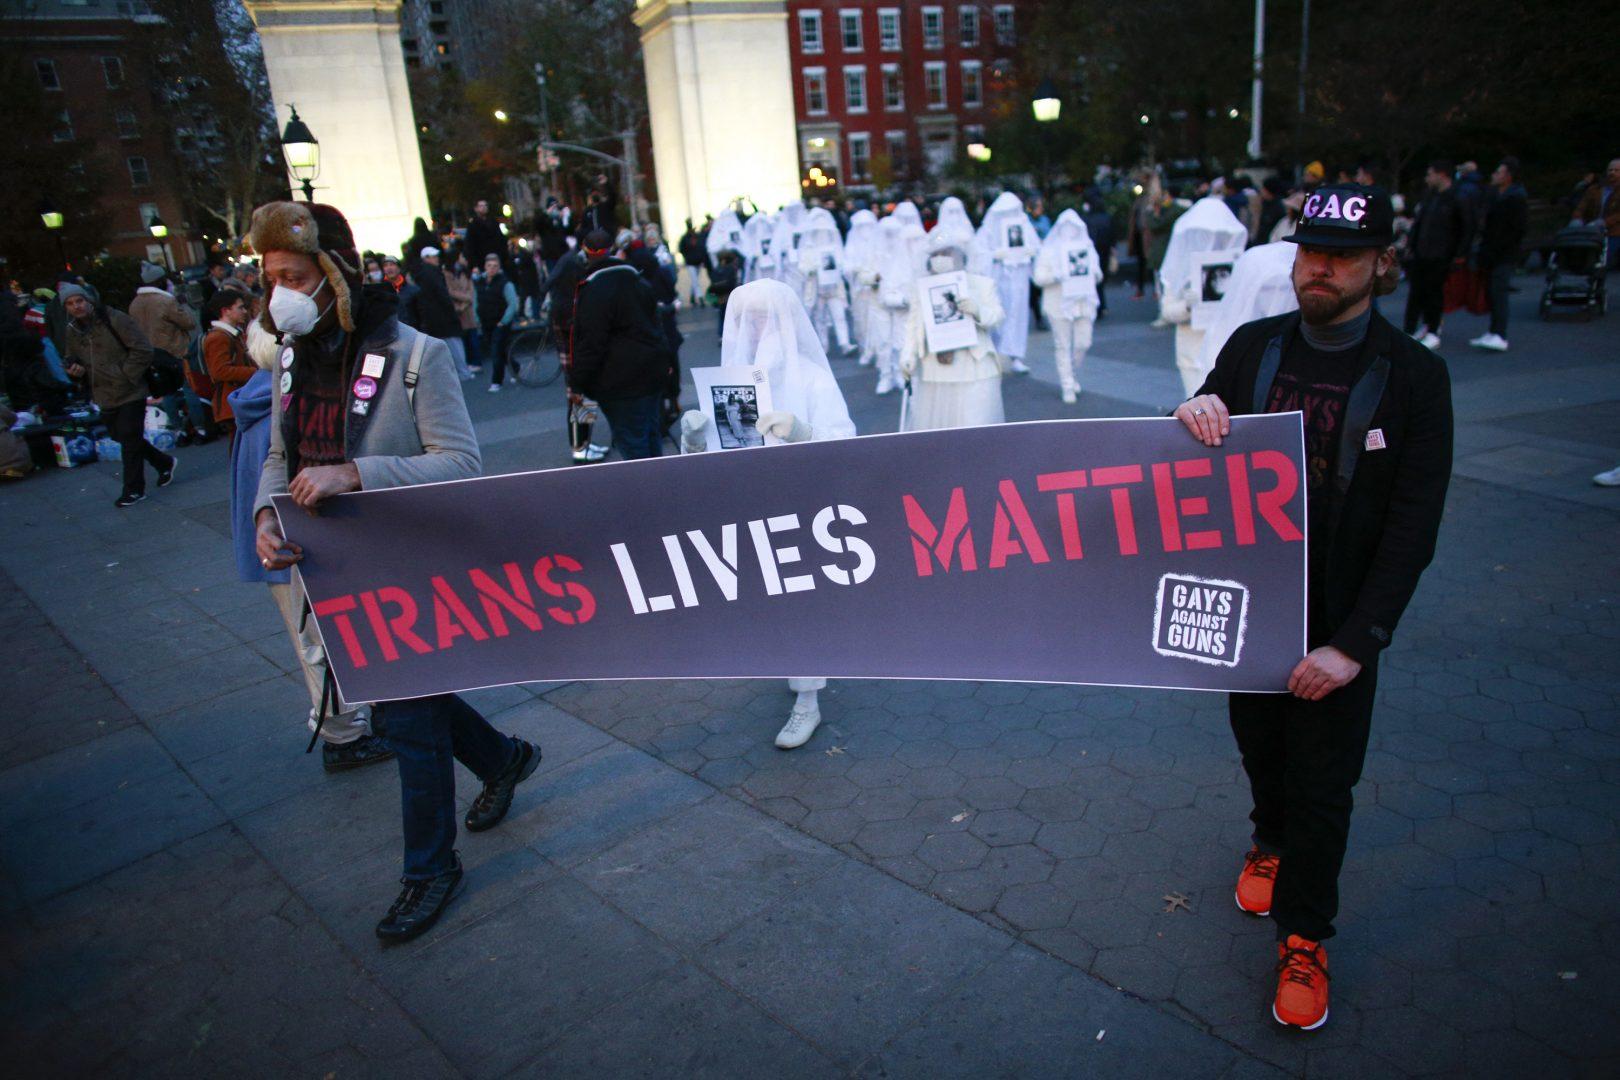 People hold a Trans Lives Matter banner as they march, honoring transgender victims, killed for who they are, during the Transgender Day of Remembrance in Washington Square Park on Nov. 20, 2021, in New York. (Kena Betancur/AFP/Getty Images/TNS)